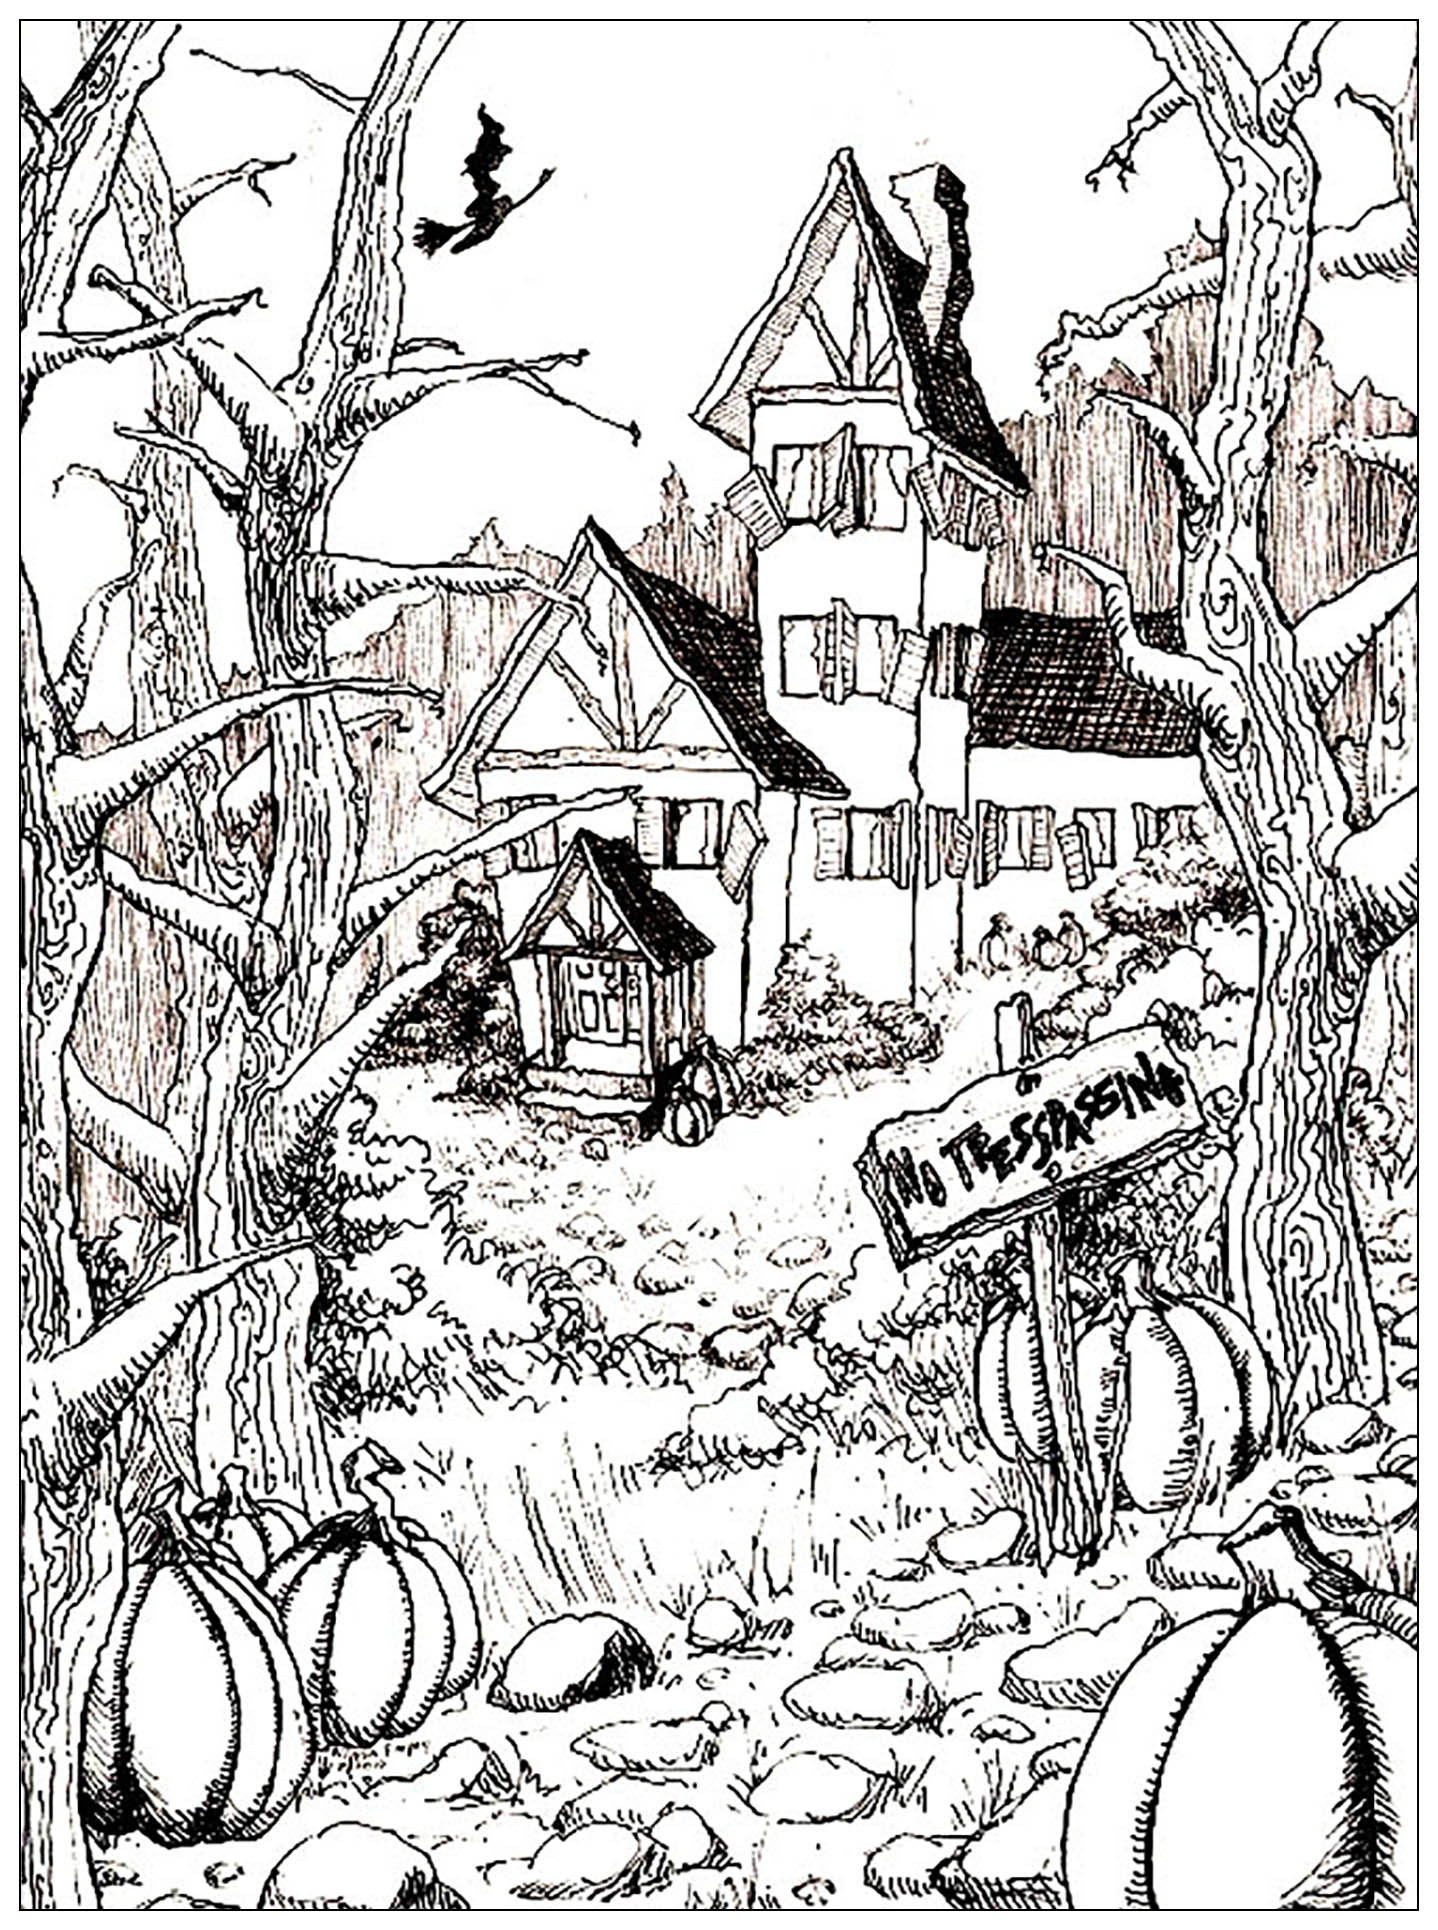 Halloween free to color for children - Halloween Kids Coloring Pages